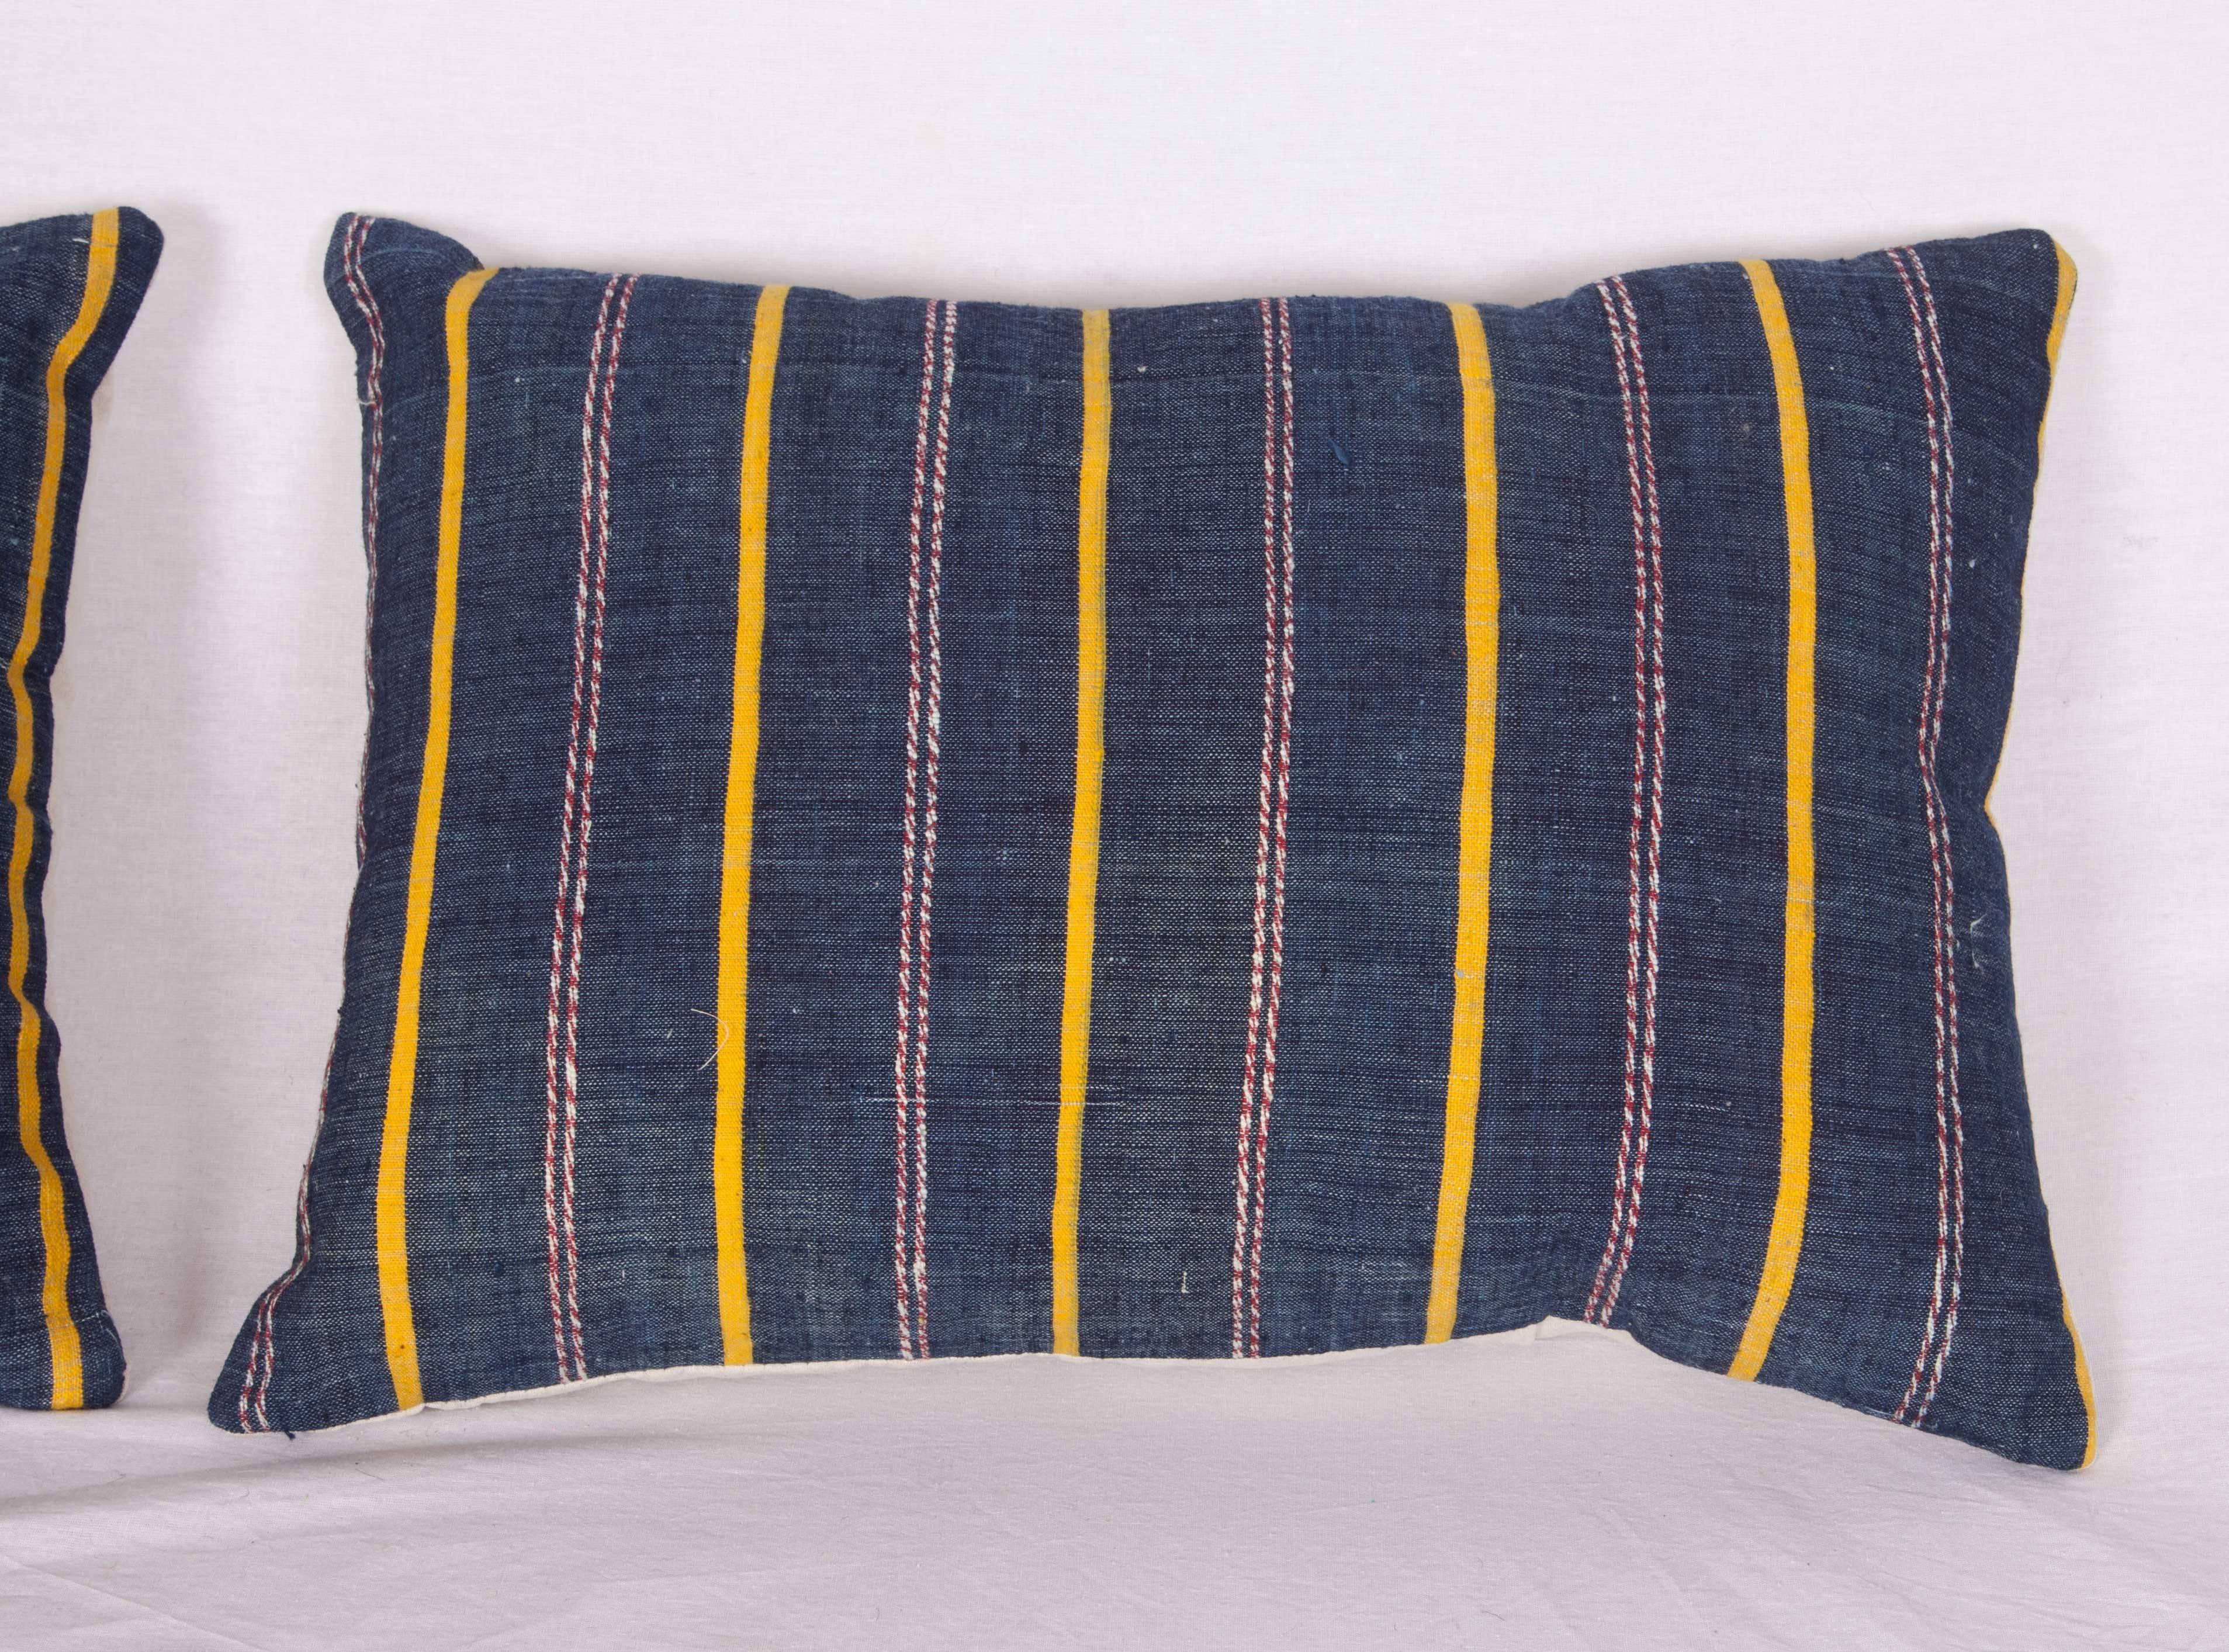 Pillow Cases Fashioned Out of an Mid-20th Century Anatolian Kilim In Good Condition For Sale In Istanbul, TR